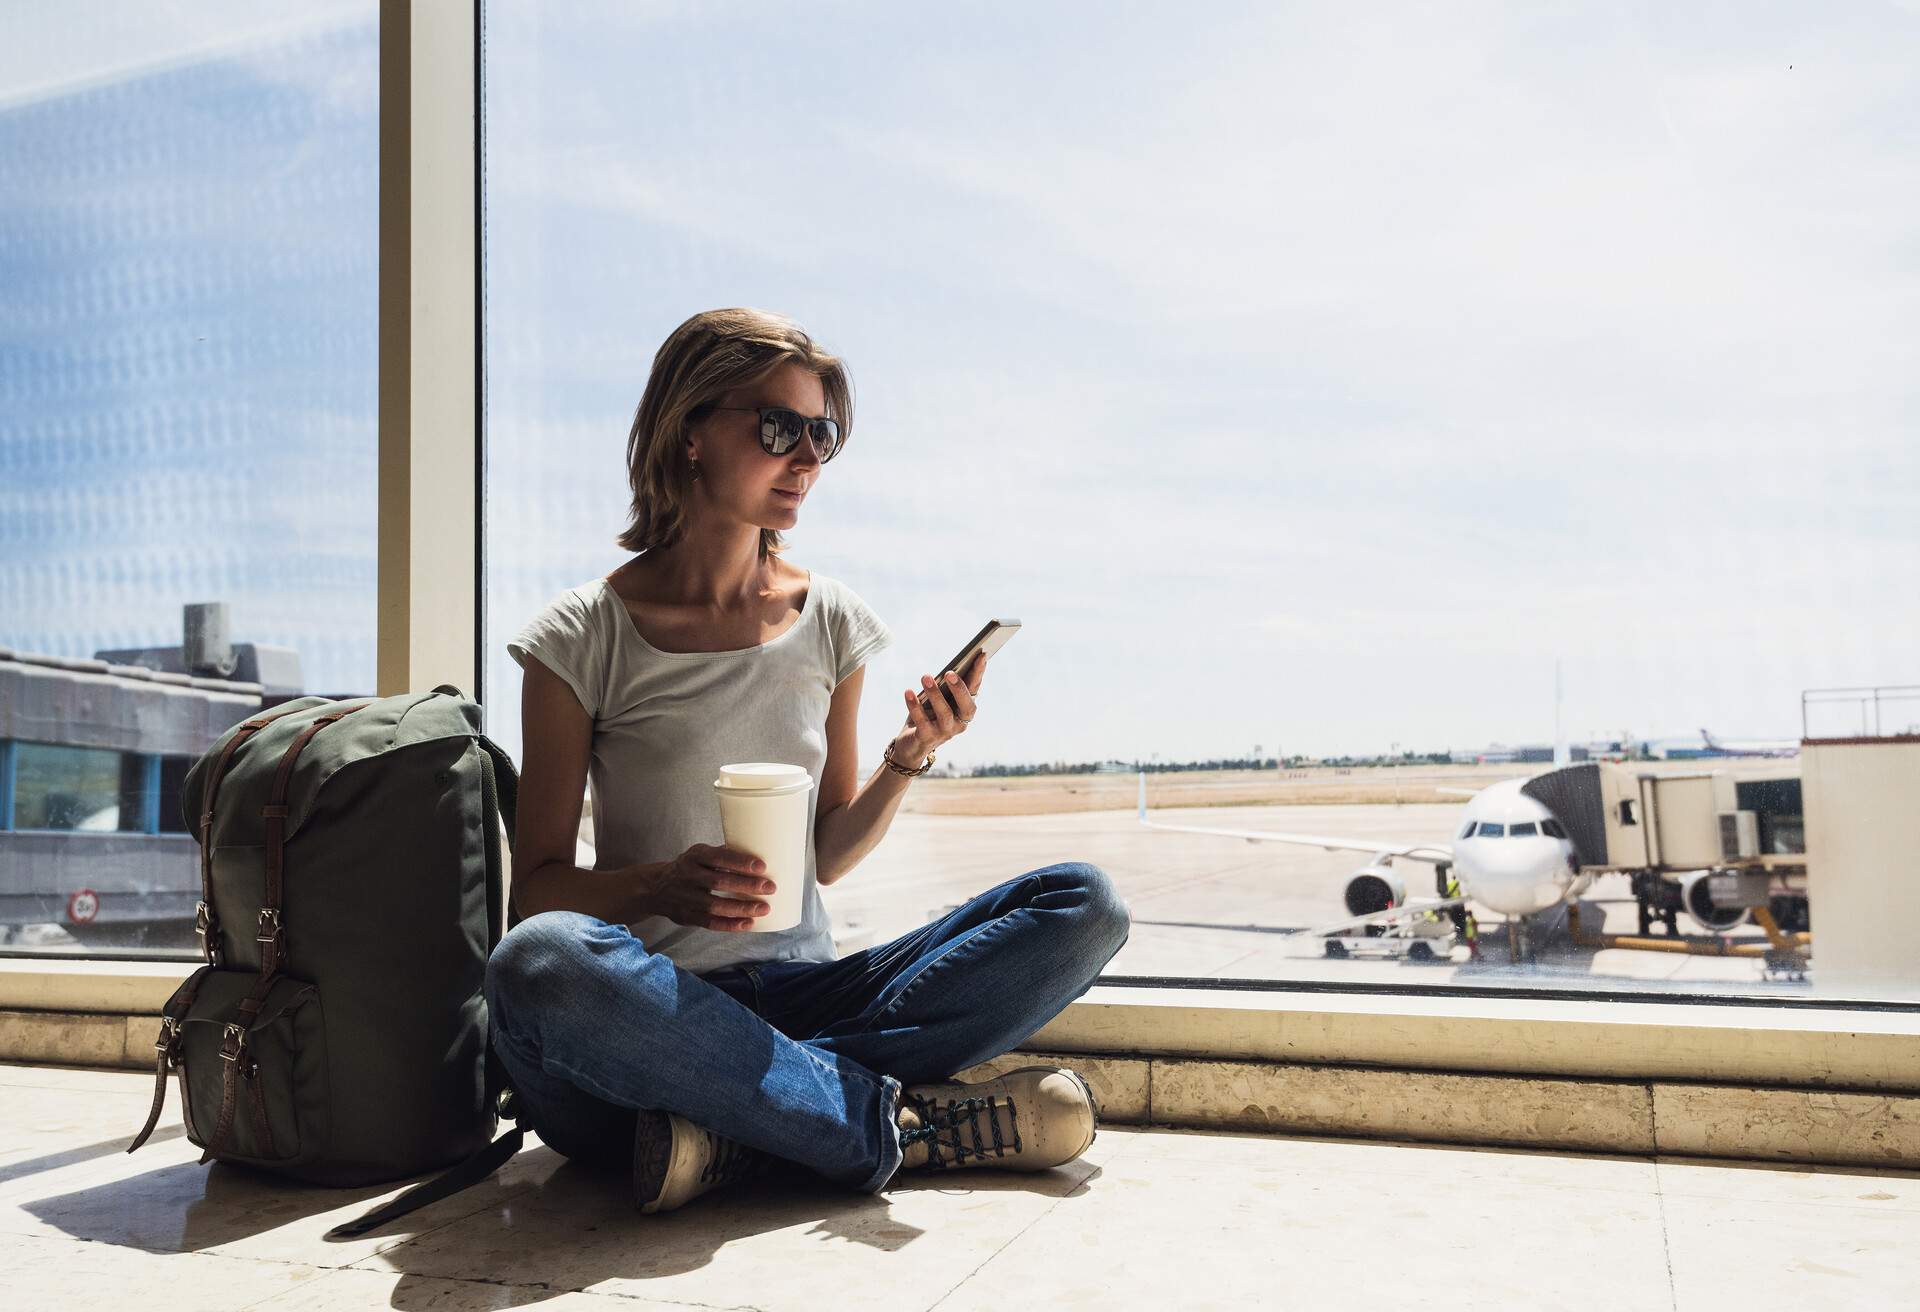 A young girl eagerly awaiting her plane at the airport, comfortably seated on the floor, holding a drink and her phone in her hands, framed by the transparent glass wall of the boarding area.